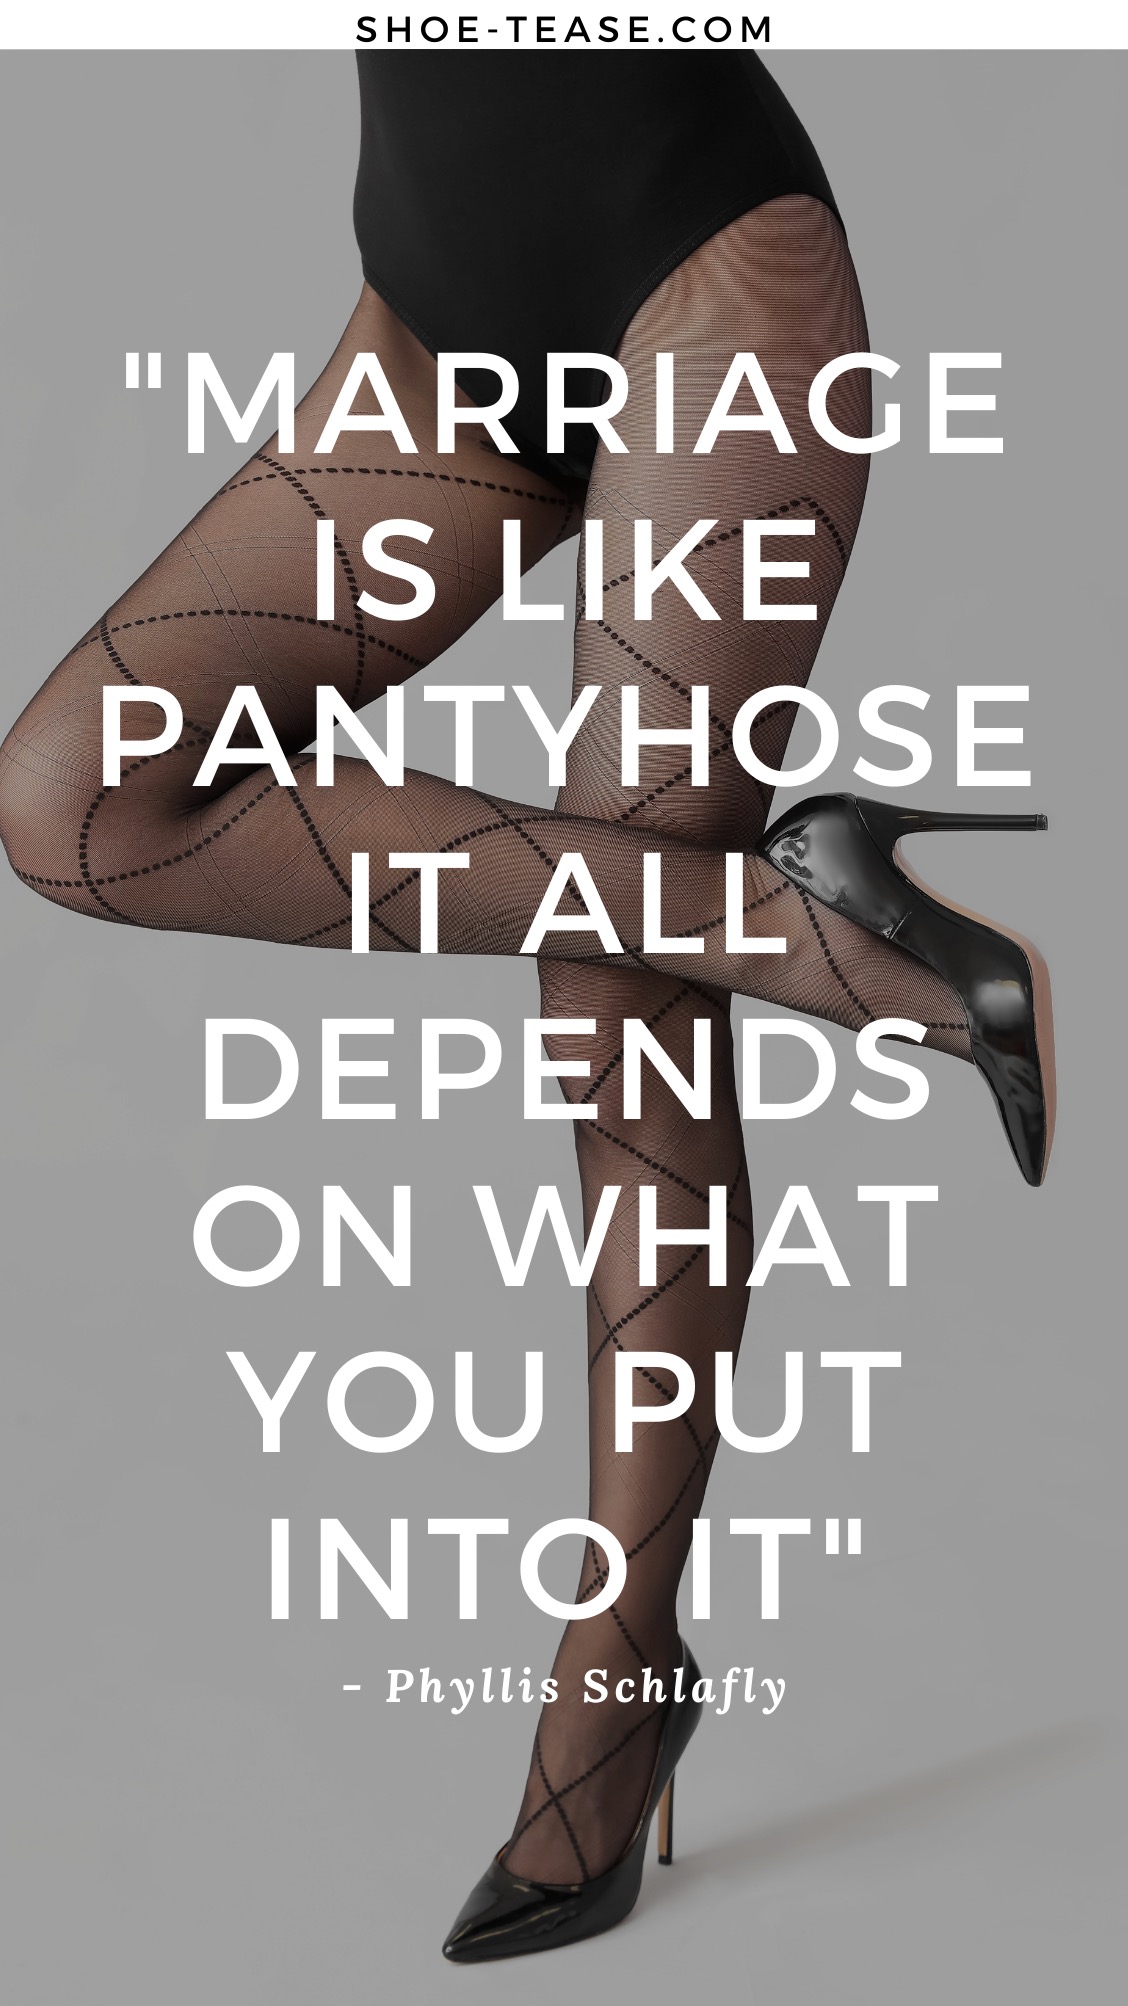 Text reading Marriage is like pantyhose. It all depends on what you put into it by Phyllis Schlafly over cropped view of woman's legs wearing sheer black pantyhose black pumps and black bodysuit.